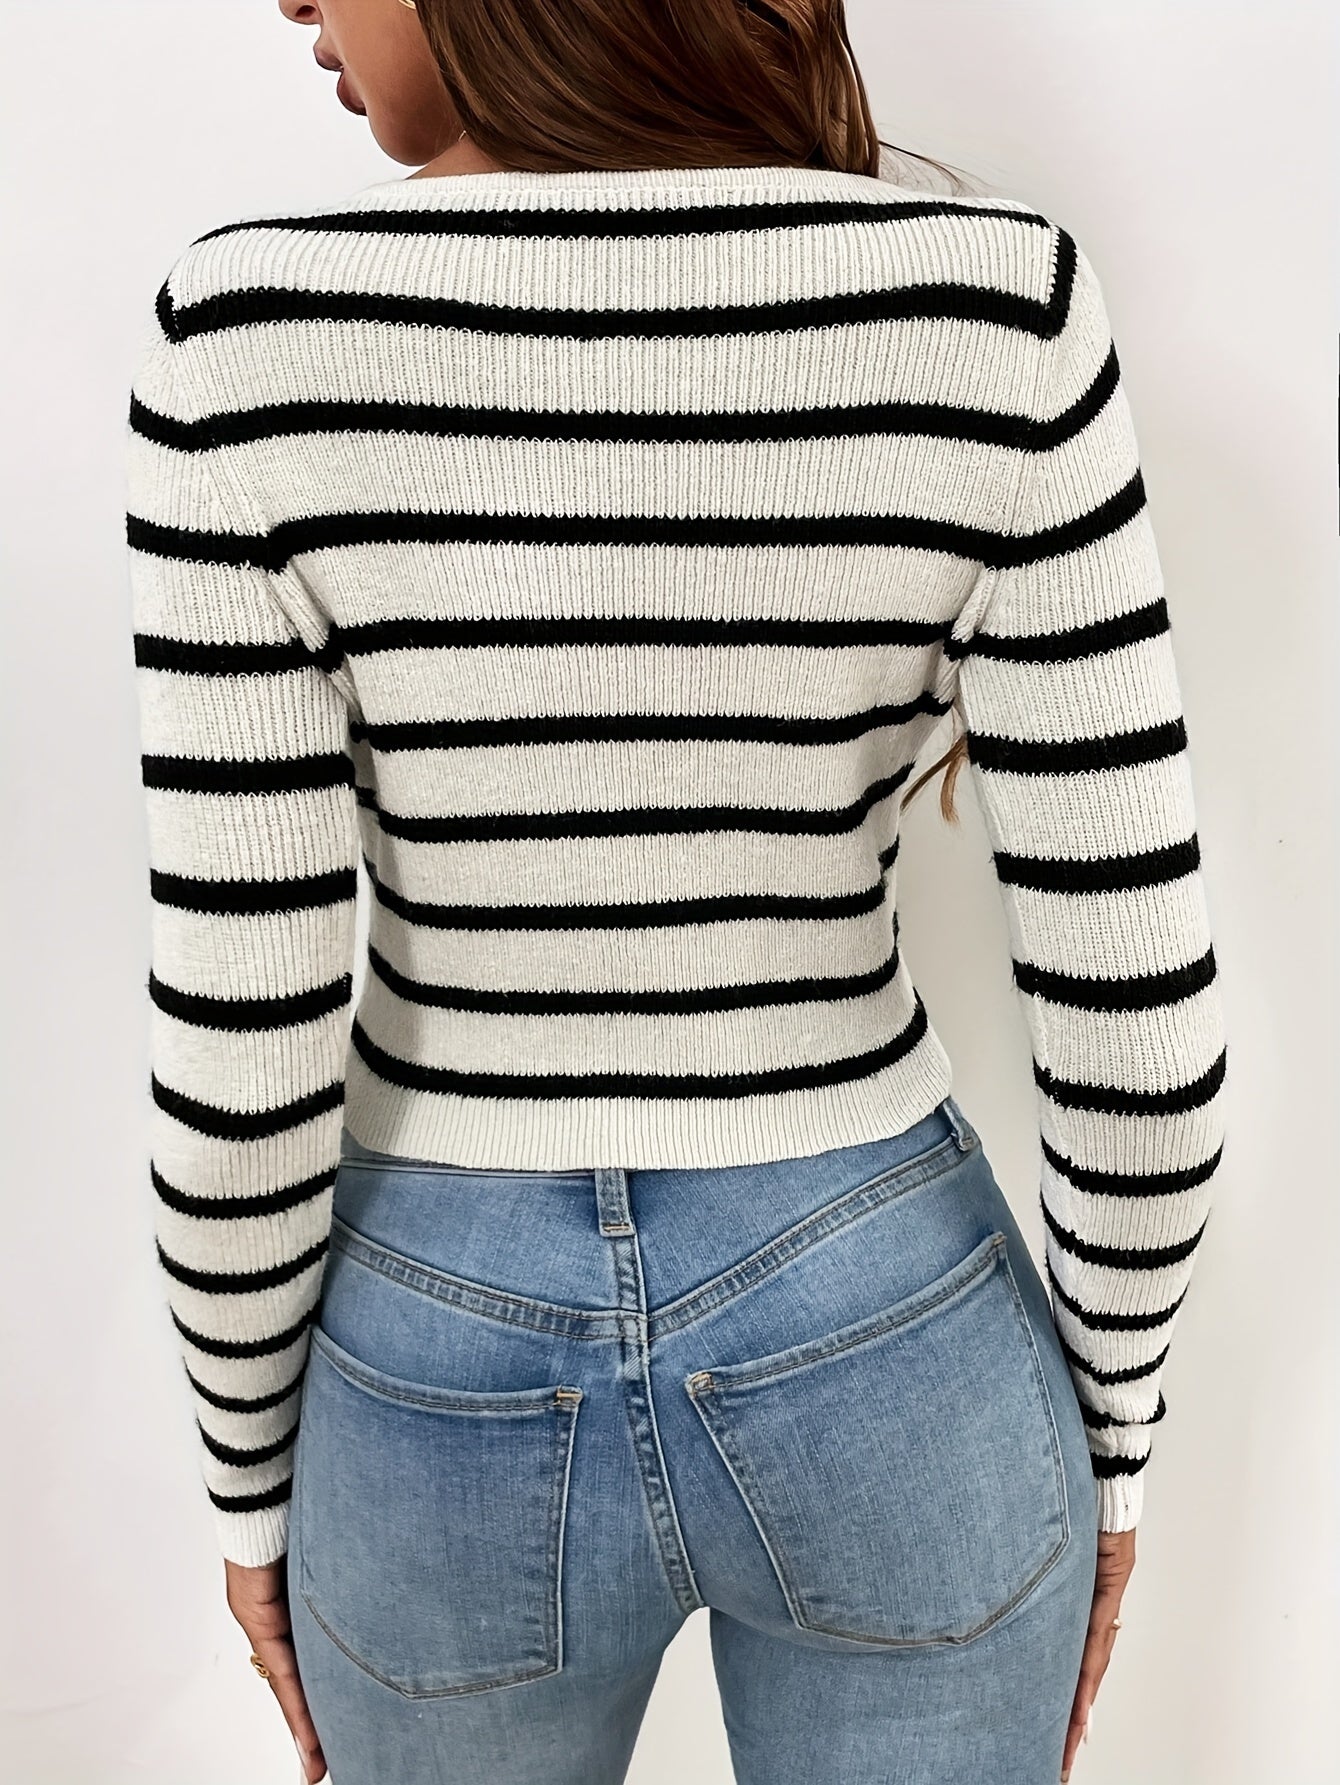 Antmvs Striped Notched Neck Knitted Top, Casual Long Sleeve Slim Sweater, Women's Clothing